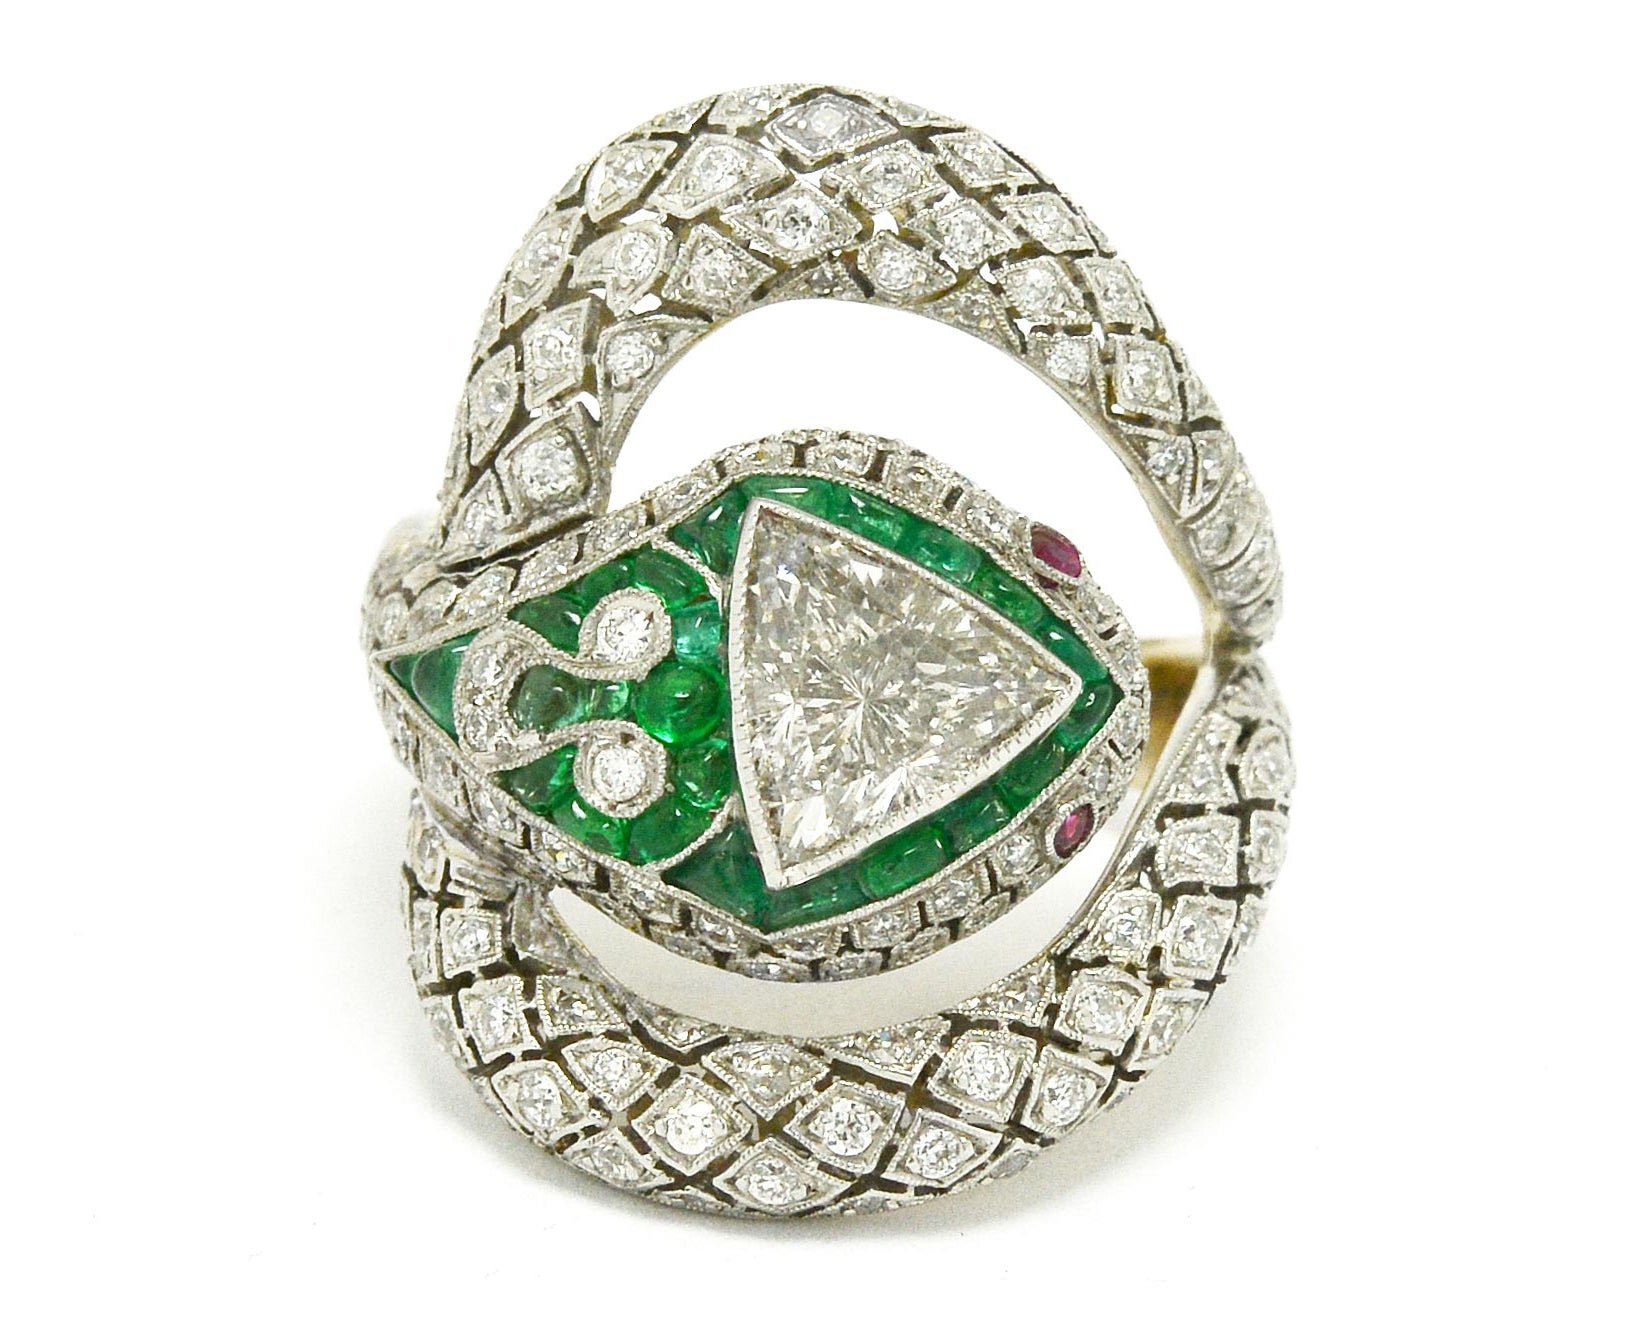 1 carat trillion cut diamond snake ring with emeralds and rubies.